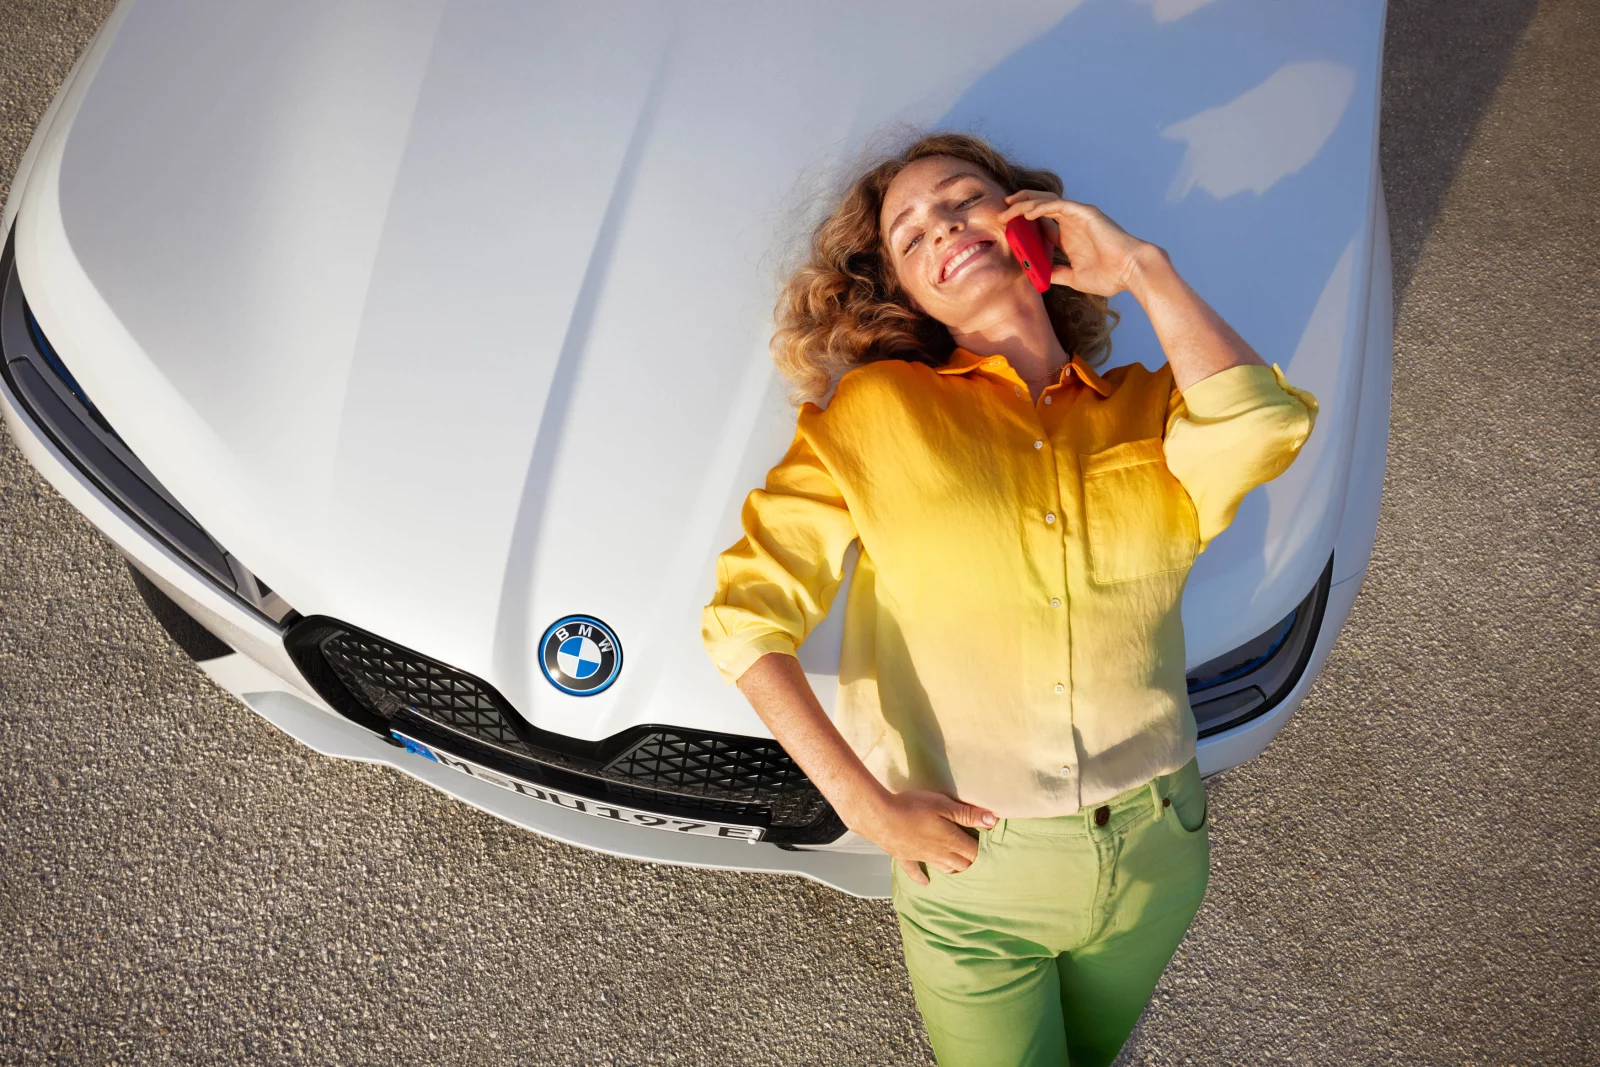 BMW Proactive Care 3 by Clemens ASCHER